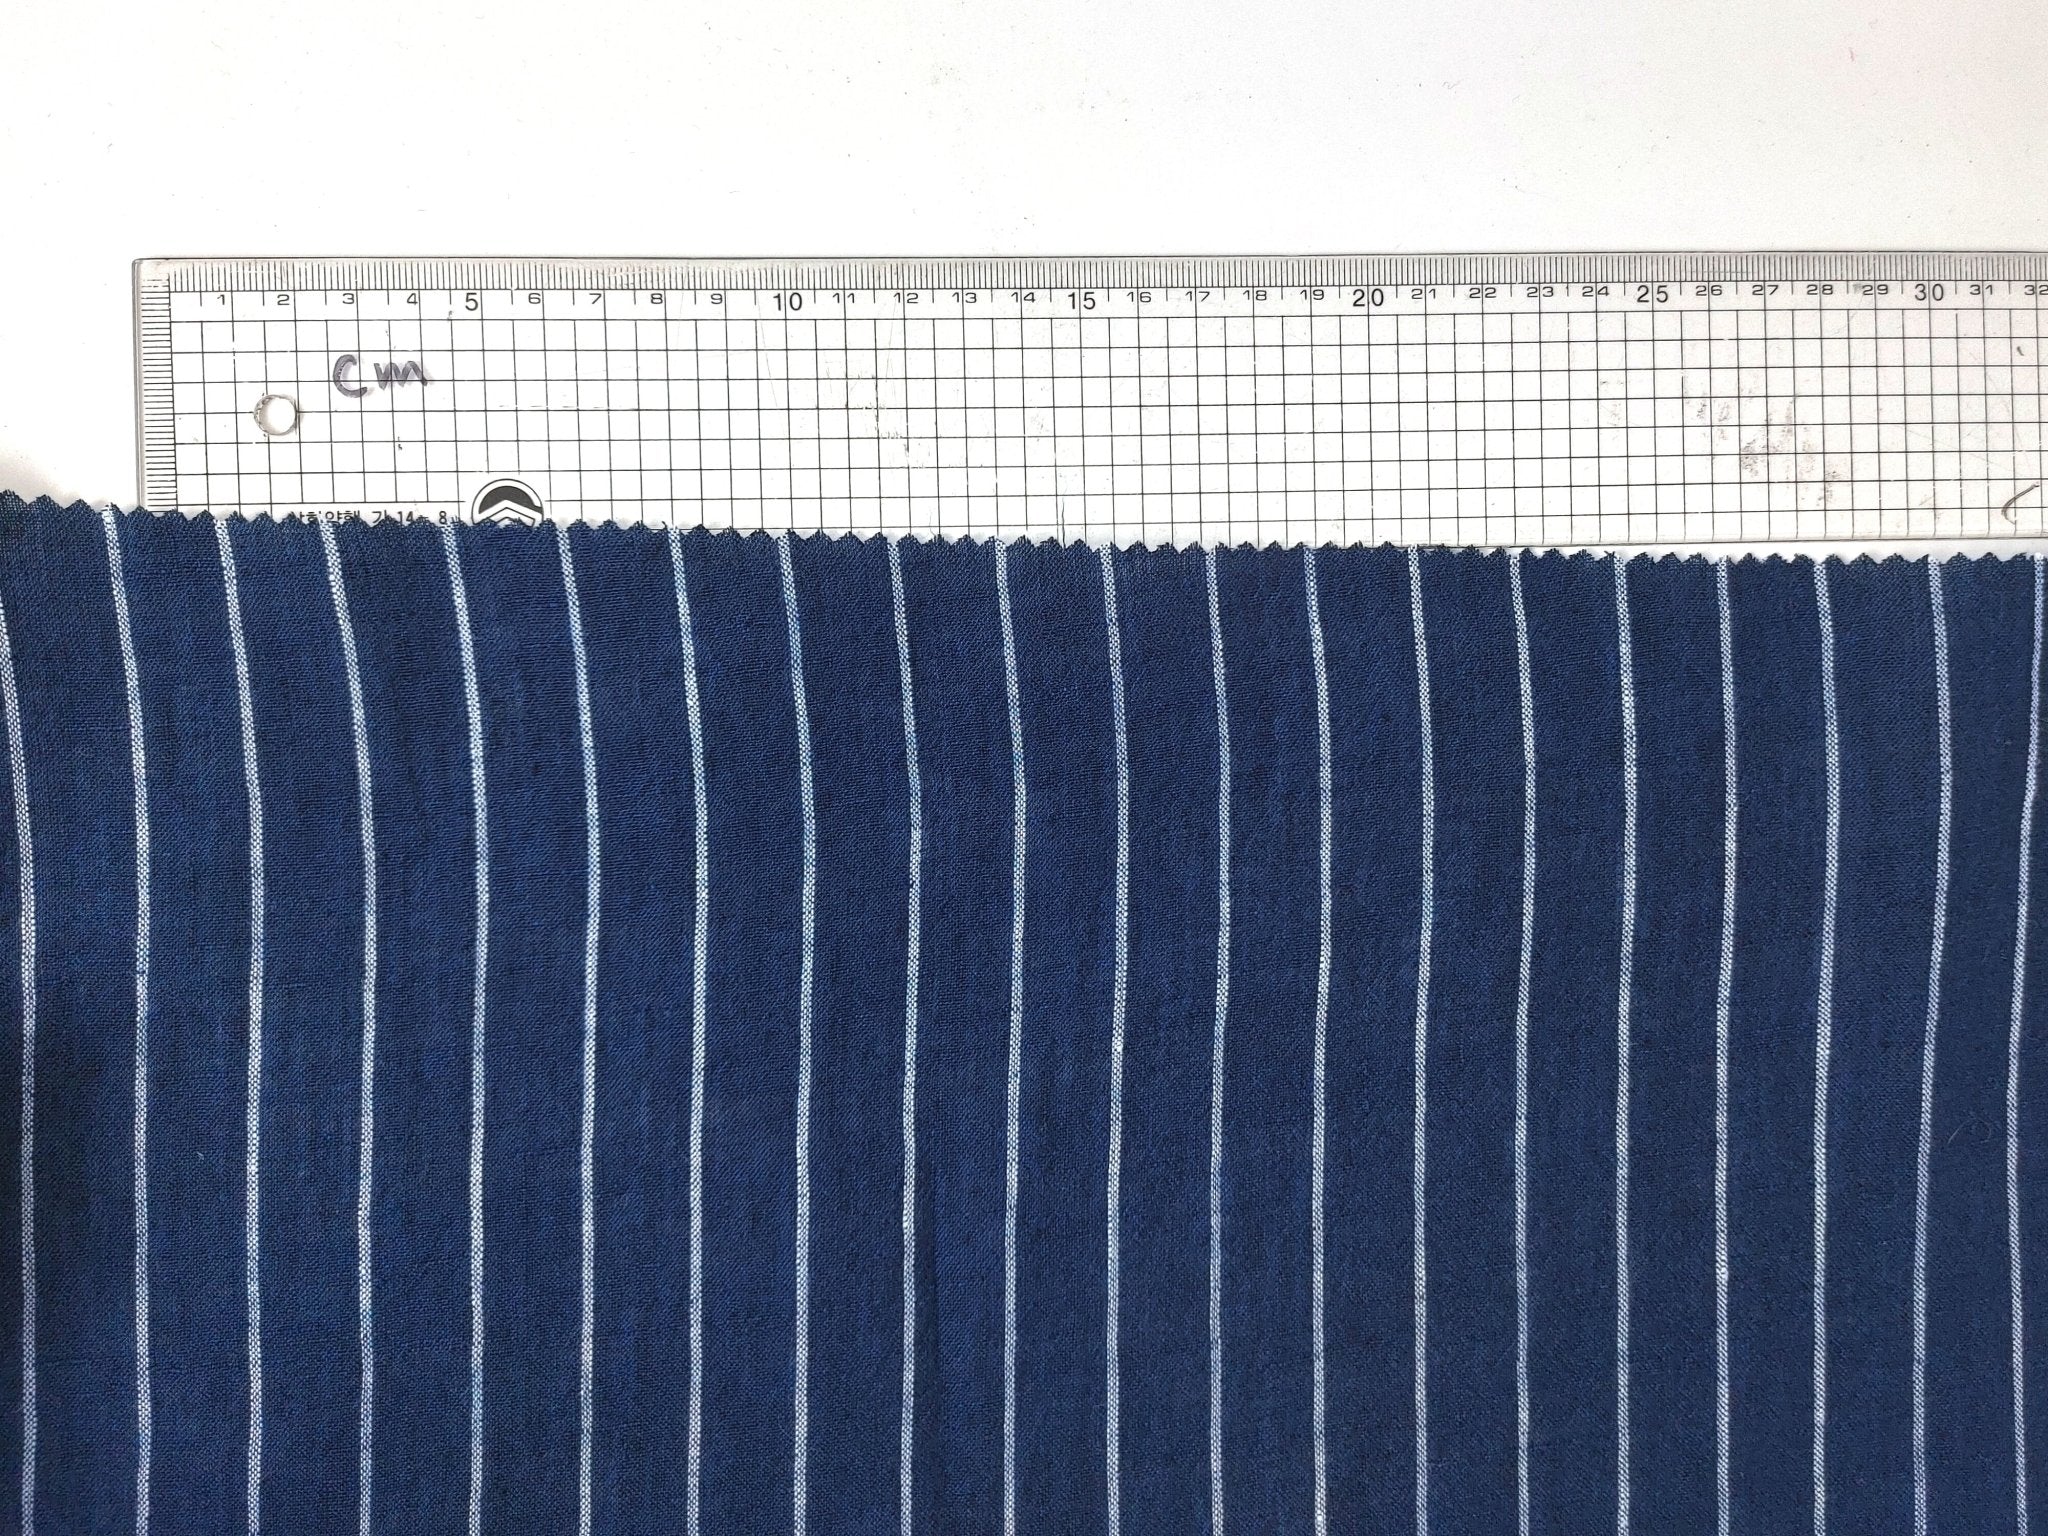 Navy Blue & White Striped Linen Fabric - 100% Natural, 21S Thread for Classic Style 7841 - The Linen Lab - Navy